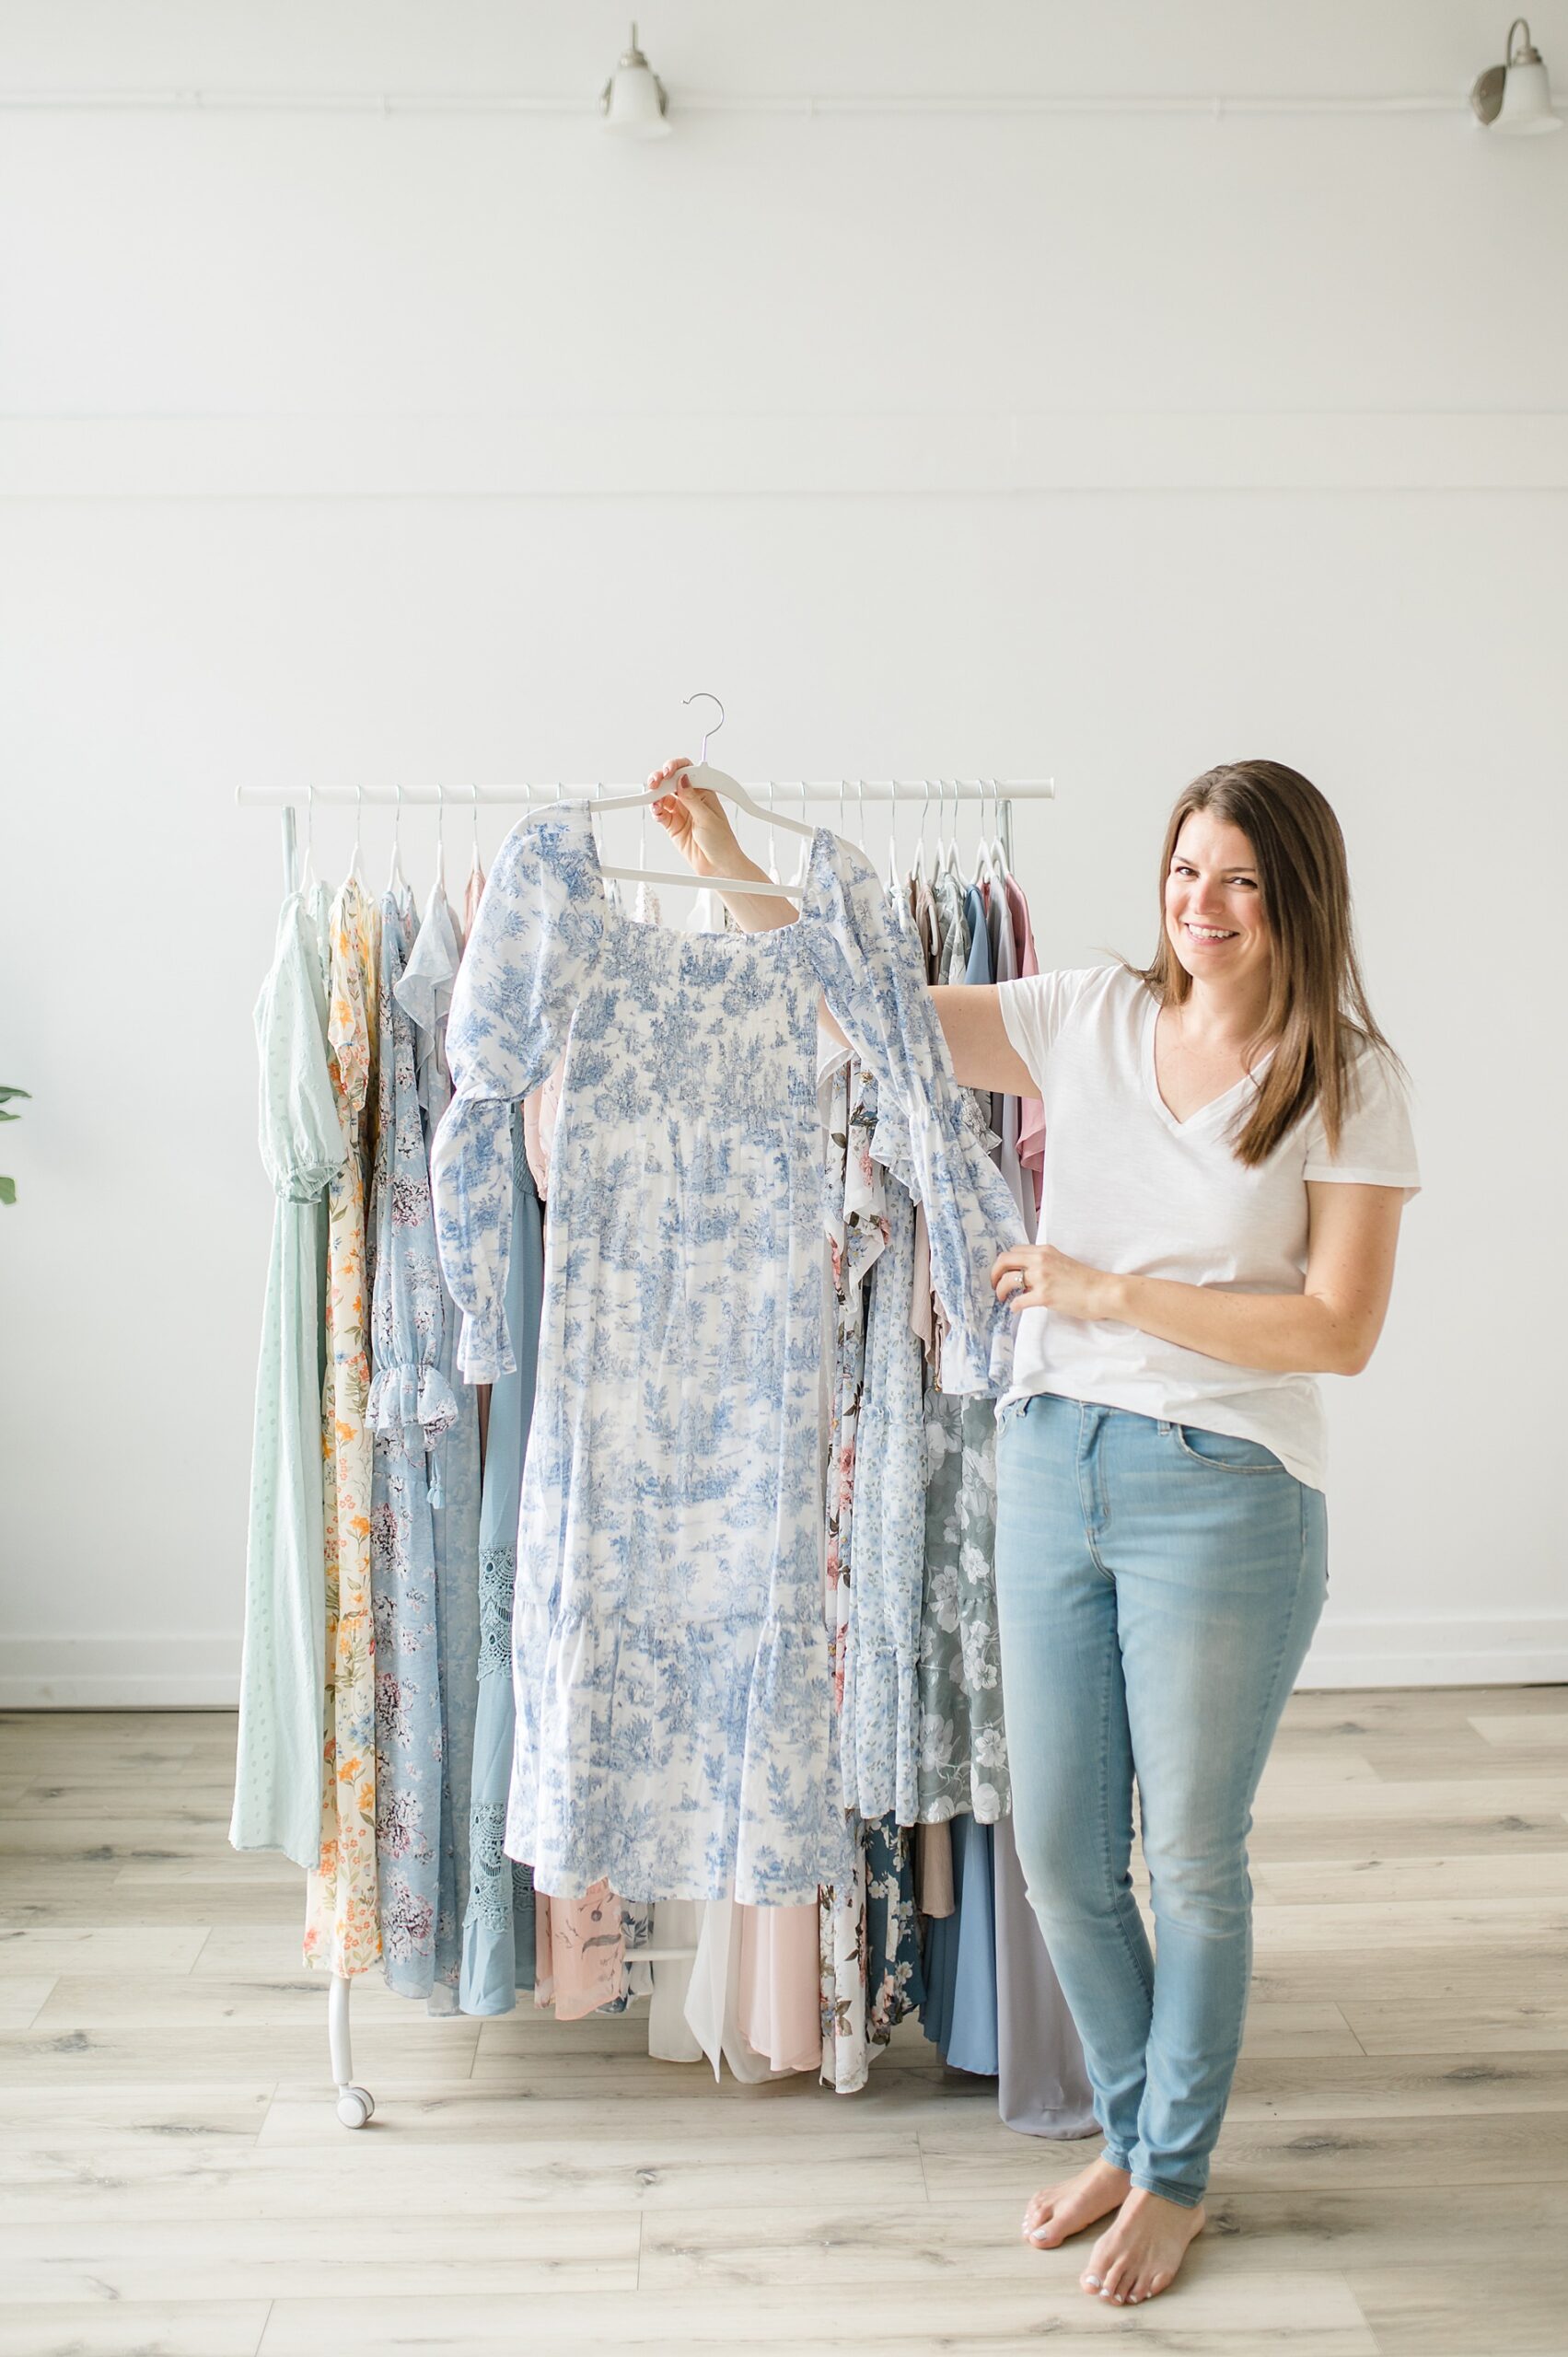 Dallas family photographer, Lindsey Dutton Photography, provides an elevated photography experience with her client closet and light and airy studio